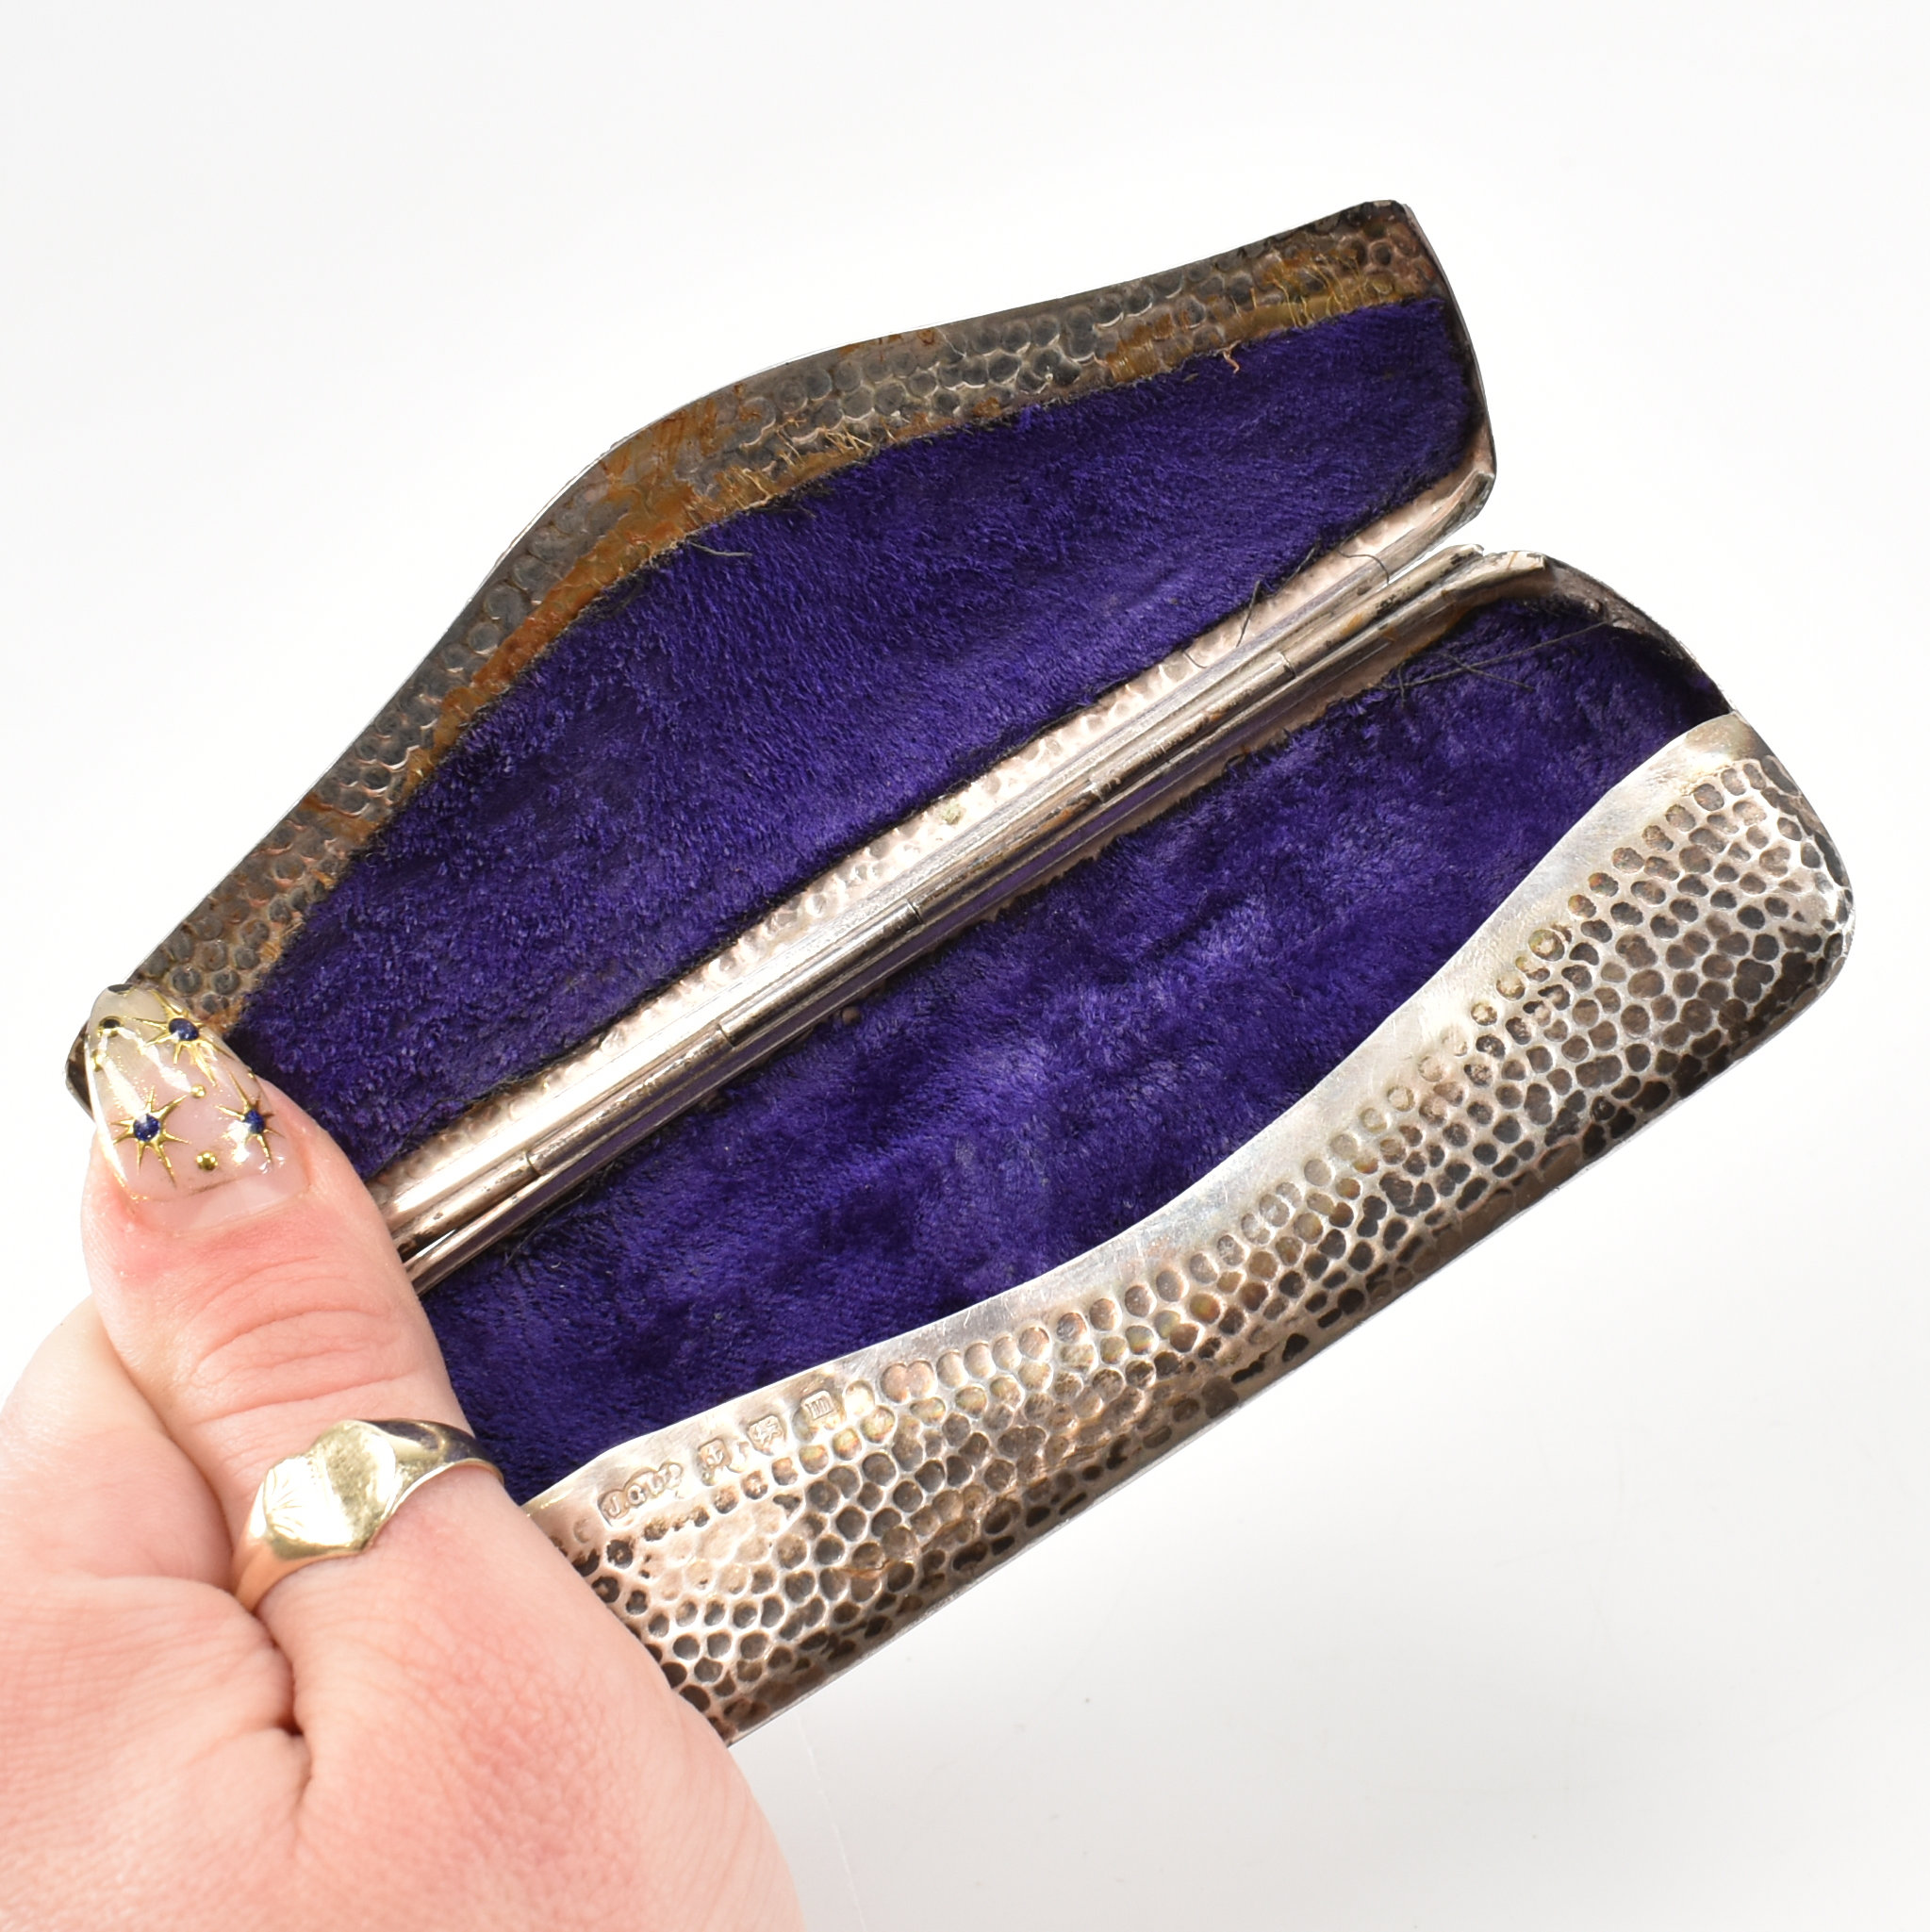 ARTS & CRAFTS SILVER HALLMARKED GLASSES CASE - Image 5 of 5